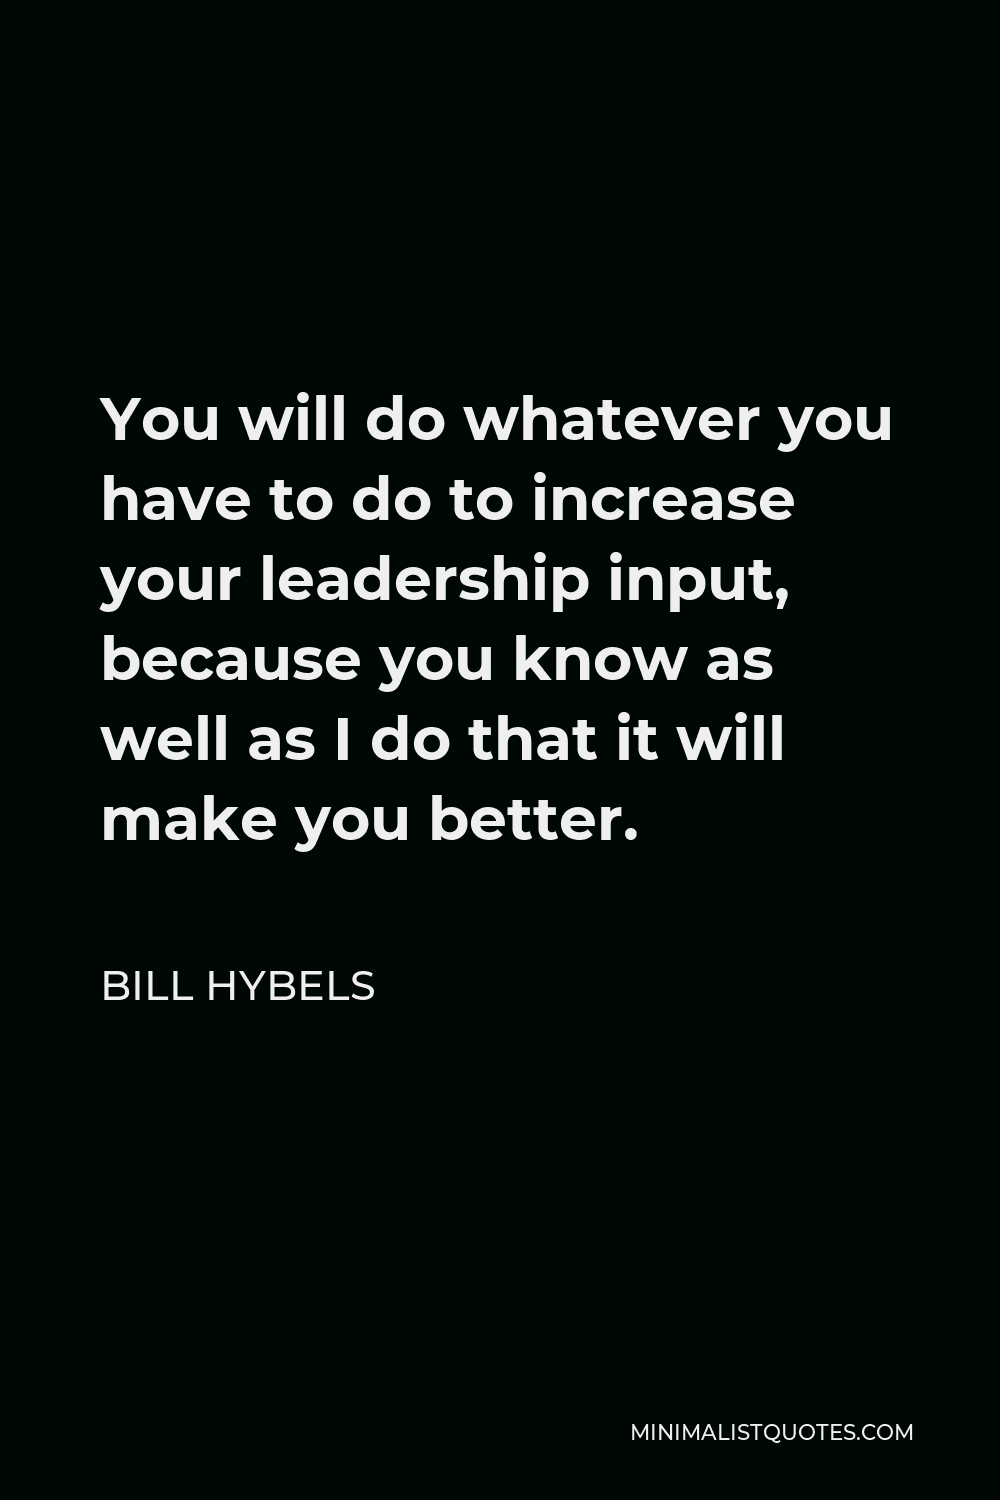 Bill Hybels Quote - You will do whatever you have to do to increase your leadership input, because you know as well as I do that it will make you better.